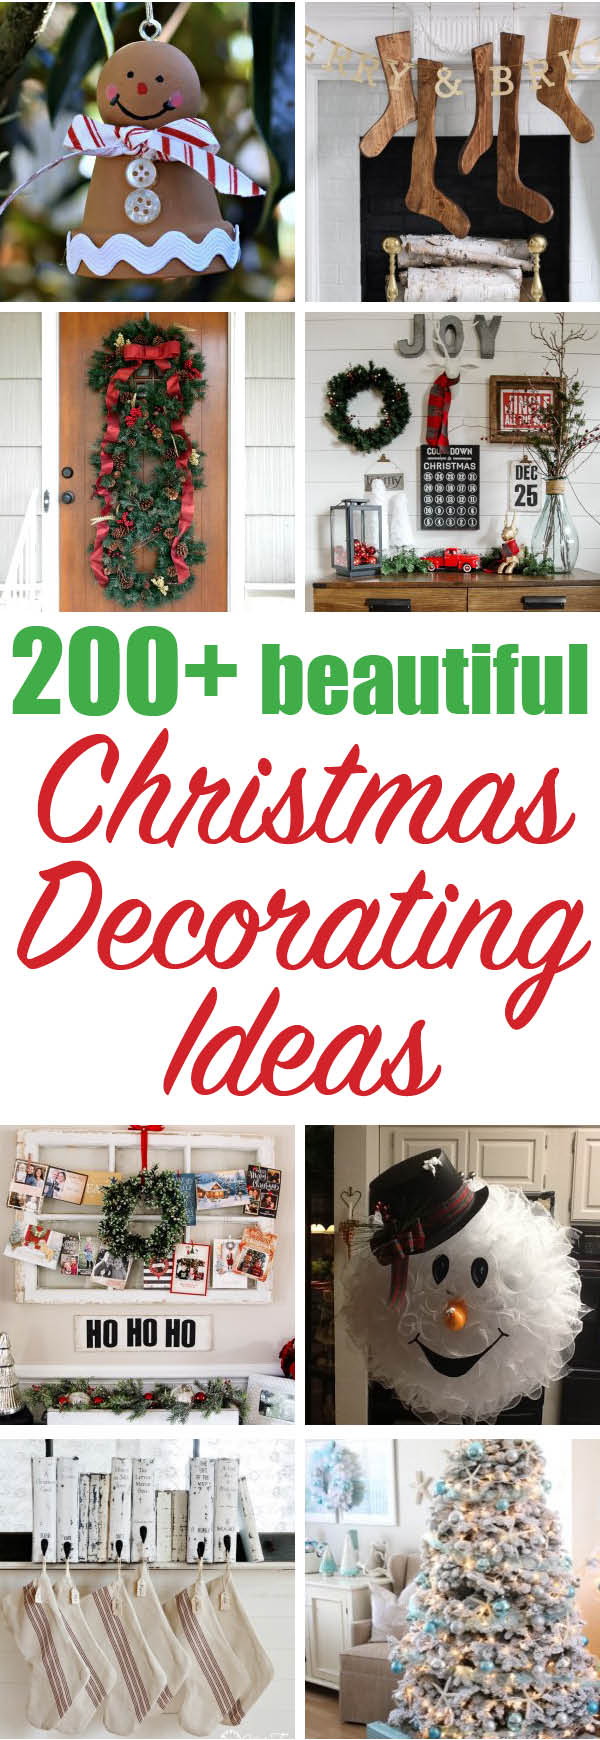 200+ Christmas decorating ideas you don't want to miss